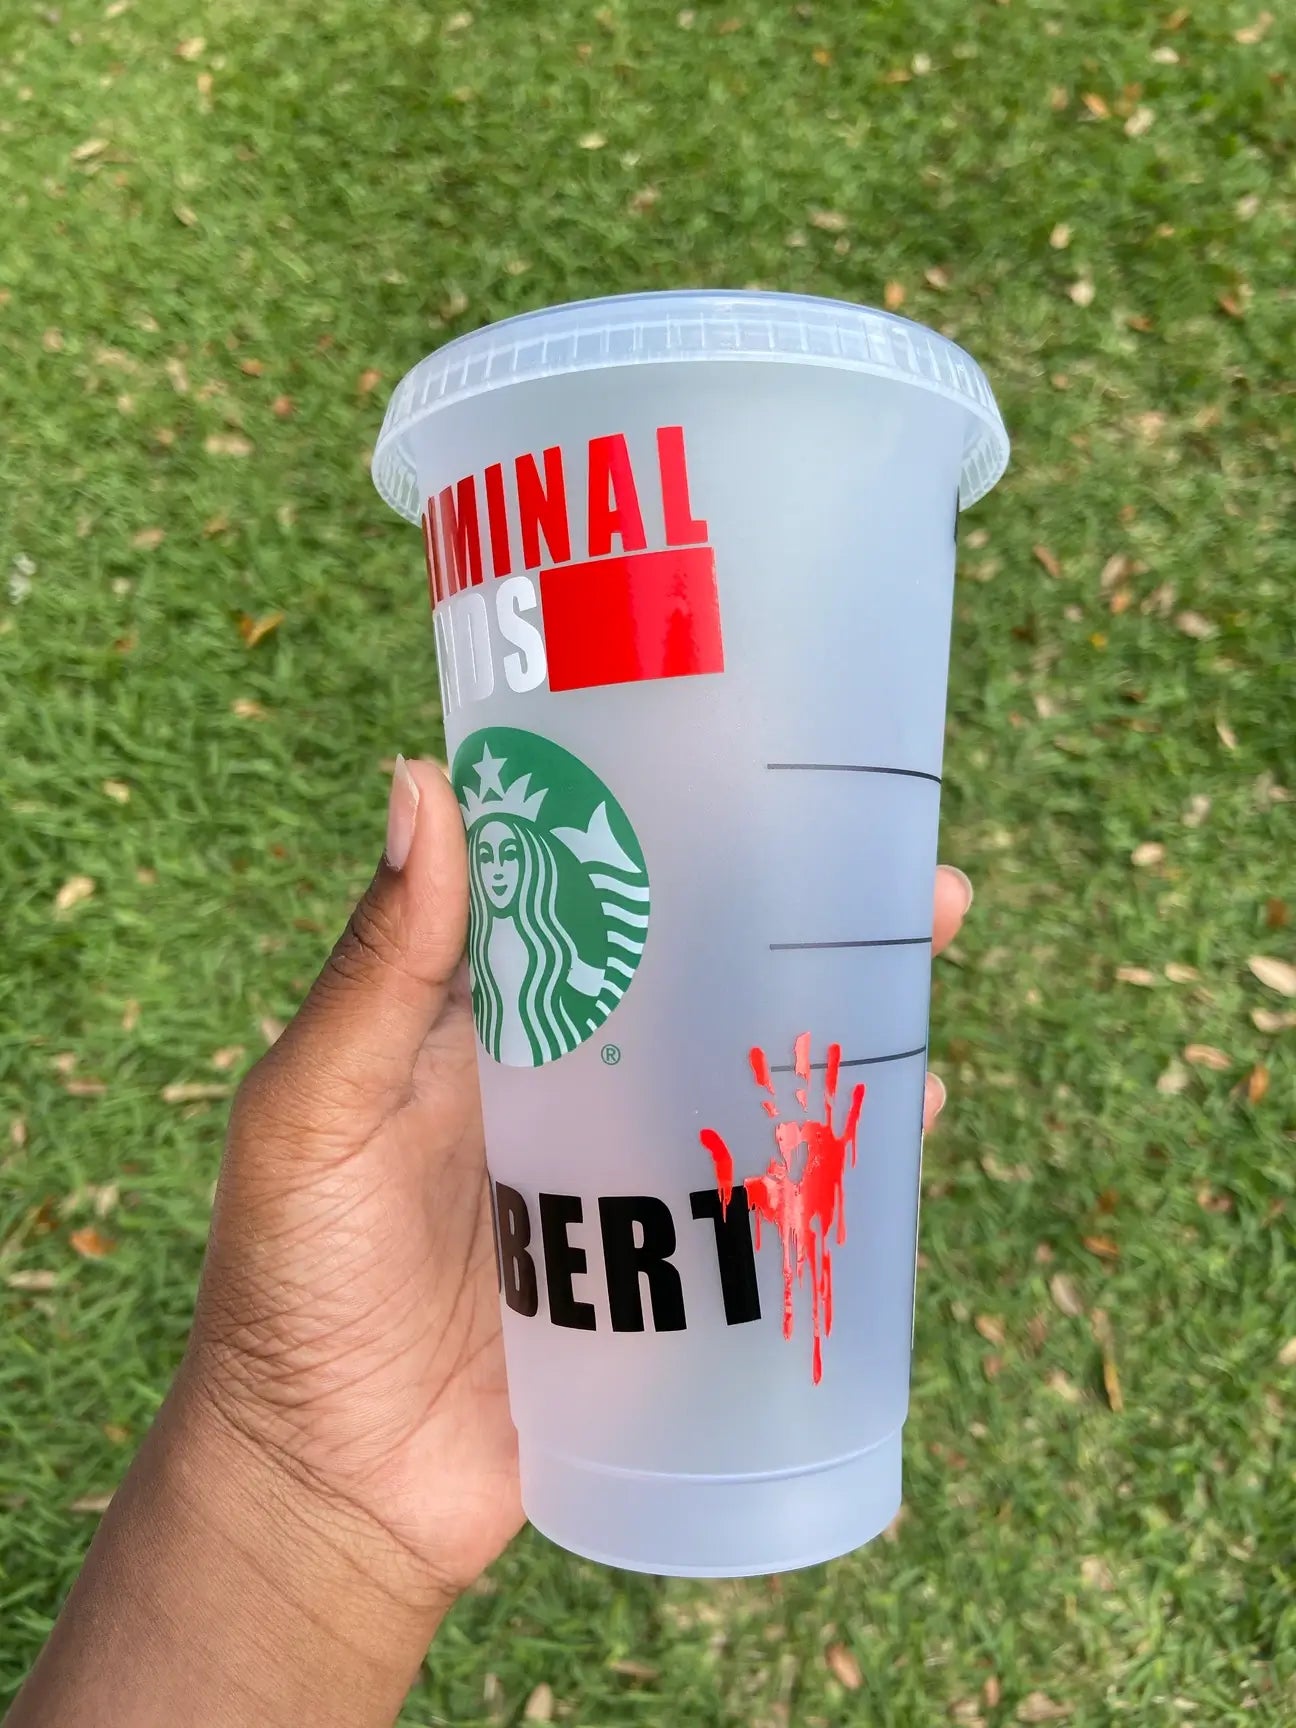 Personalized Spencer Reid from Criminal Minds starbucks cup aka Matthew Gray Gubler with a bloody hand print